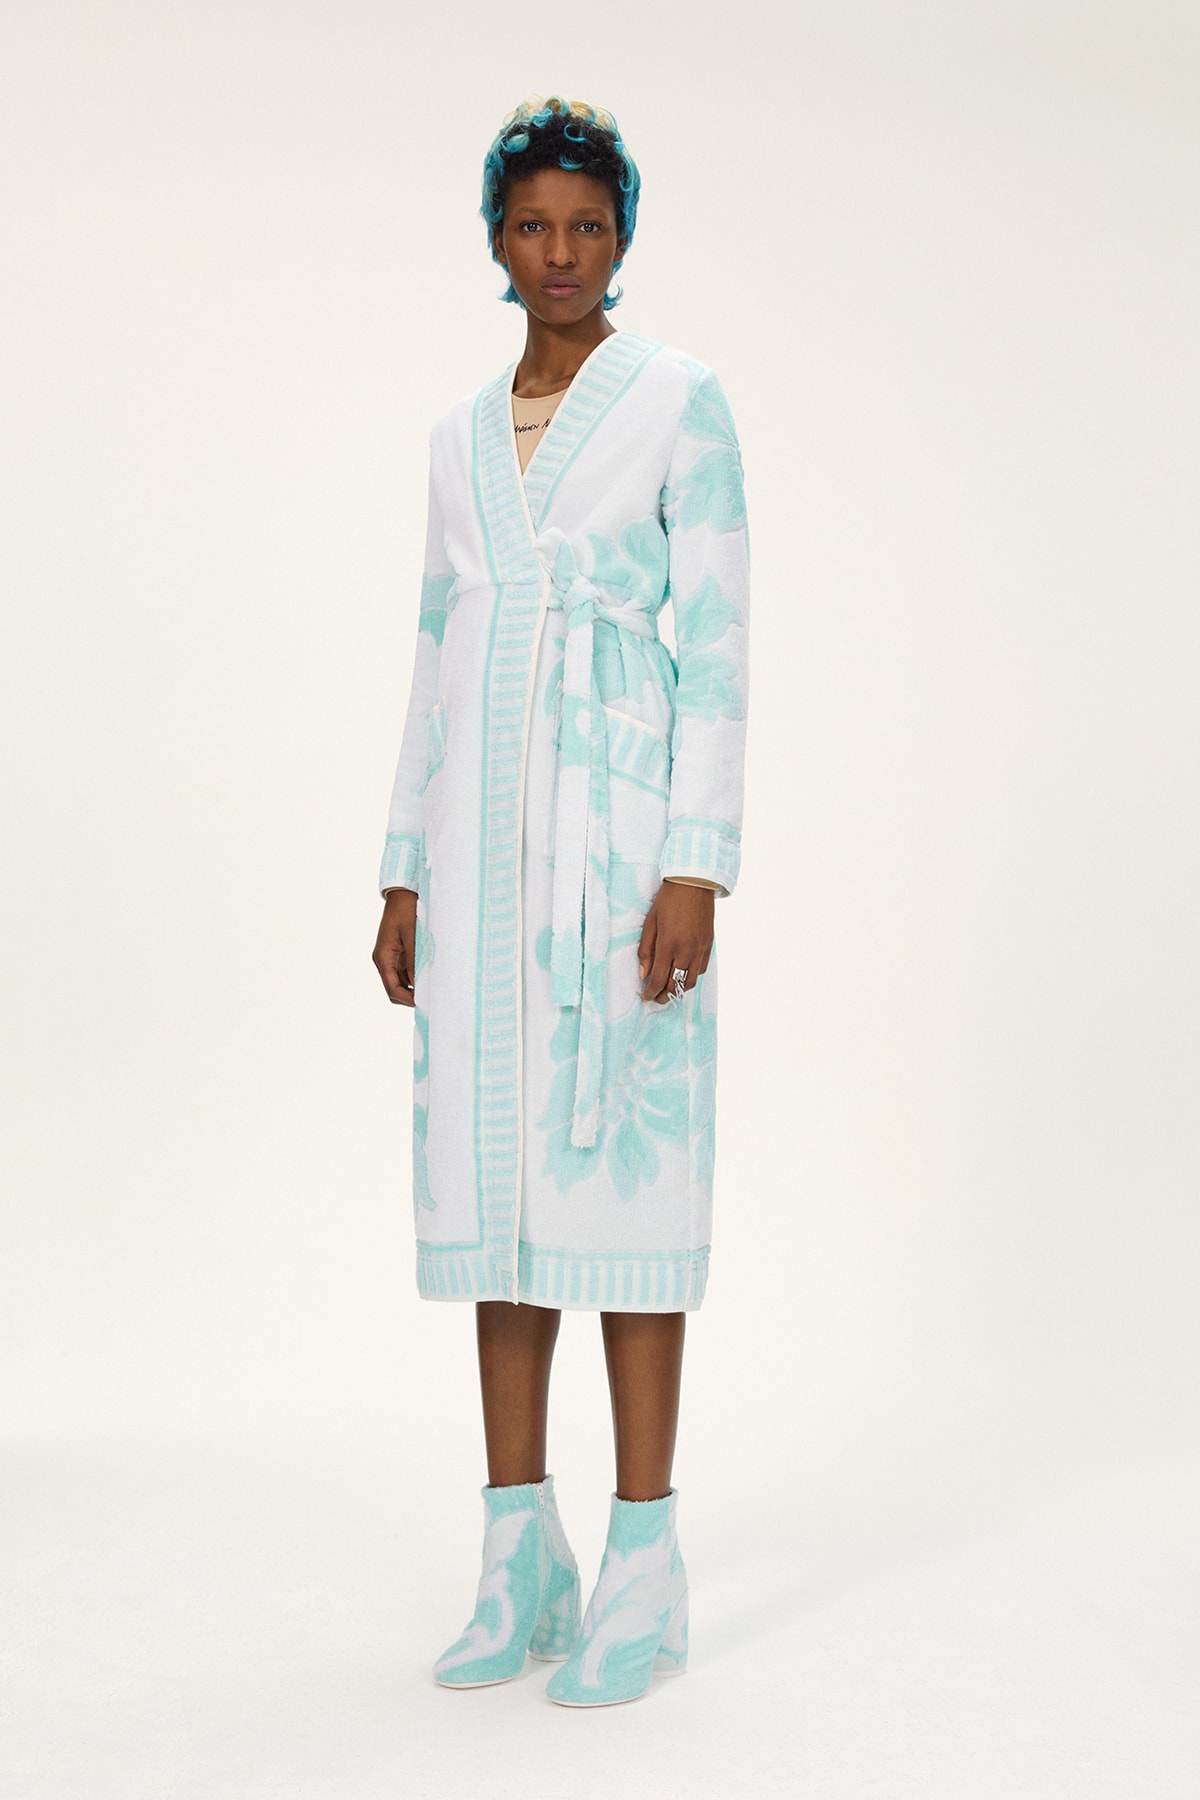 MM6 Maison Margiela Spring/Summer 2020 Collection Lookbook Robe Boots Floral Turquoise